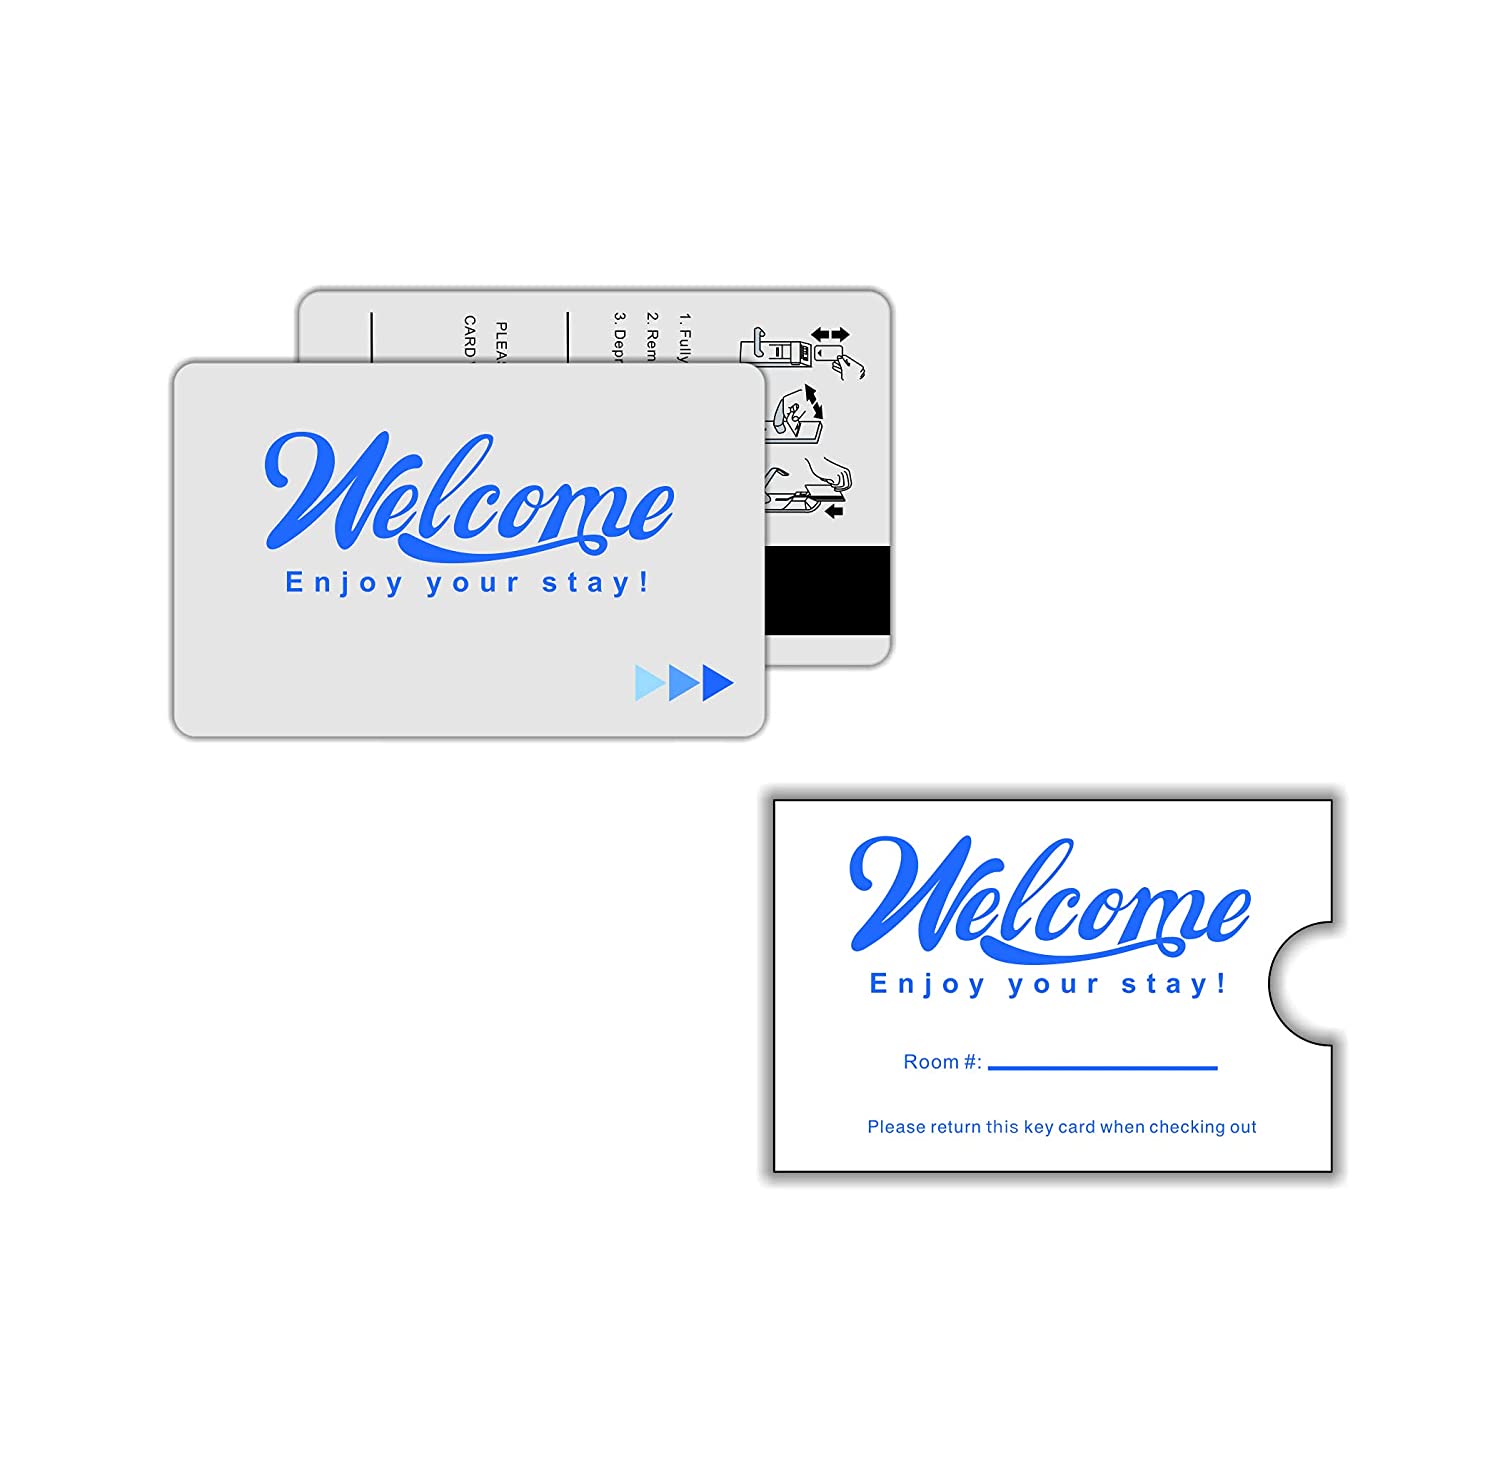 Gialer welcome enjoy your stay Hotel & Motel  magnetic key cards key card with envelopes sleeve